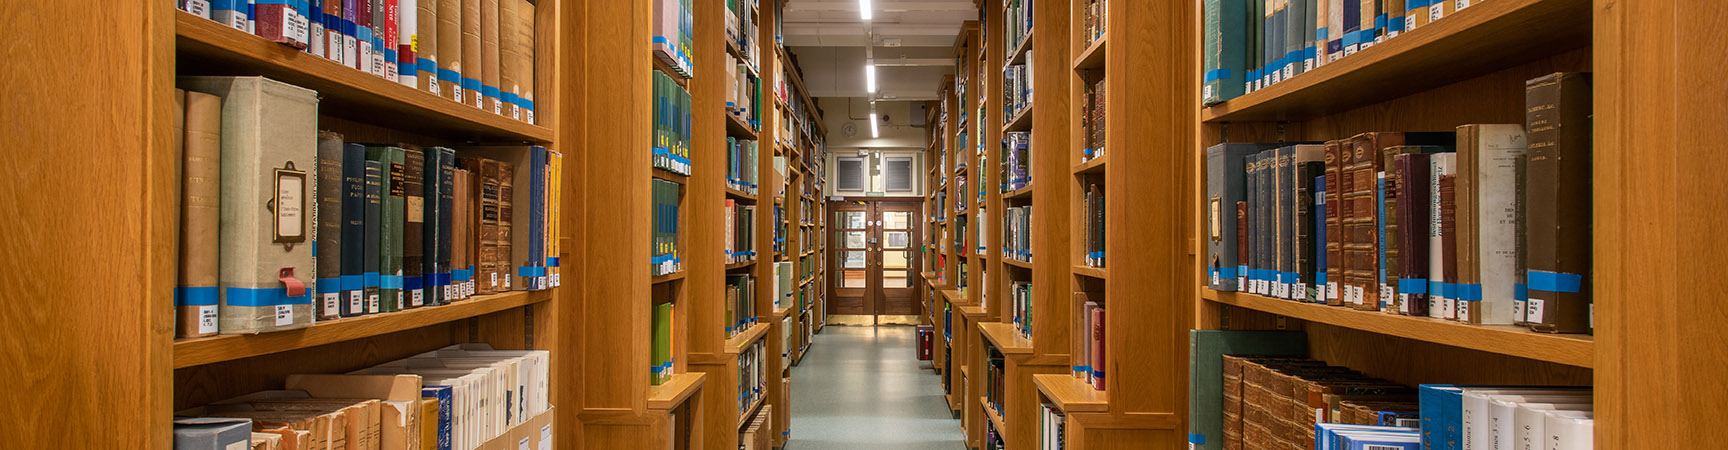 Two rows of bookshelves on either side of a walkway